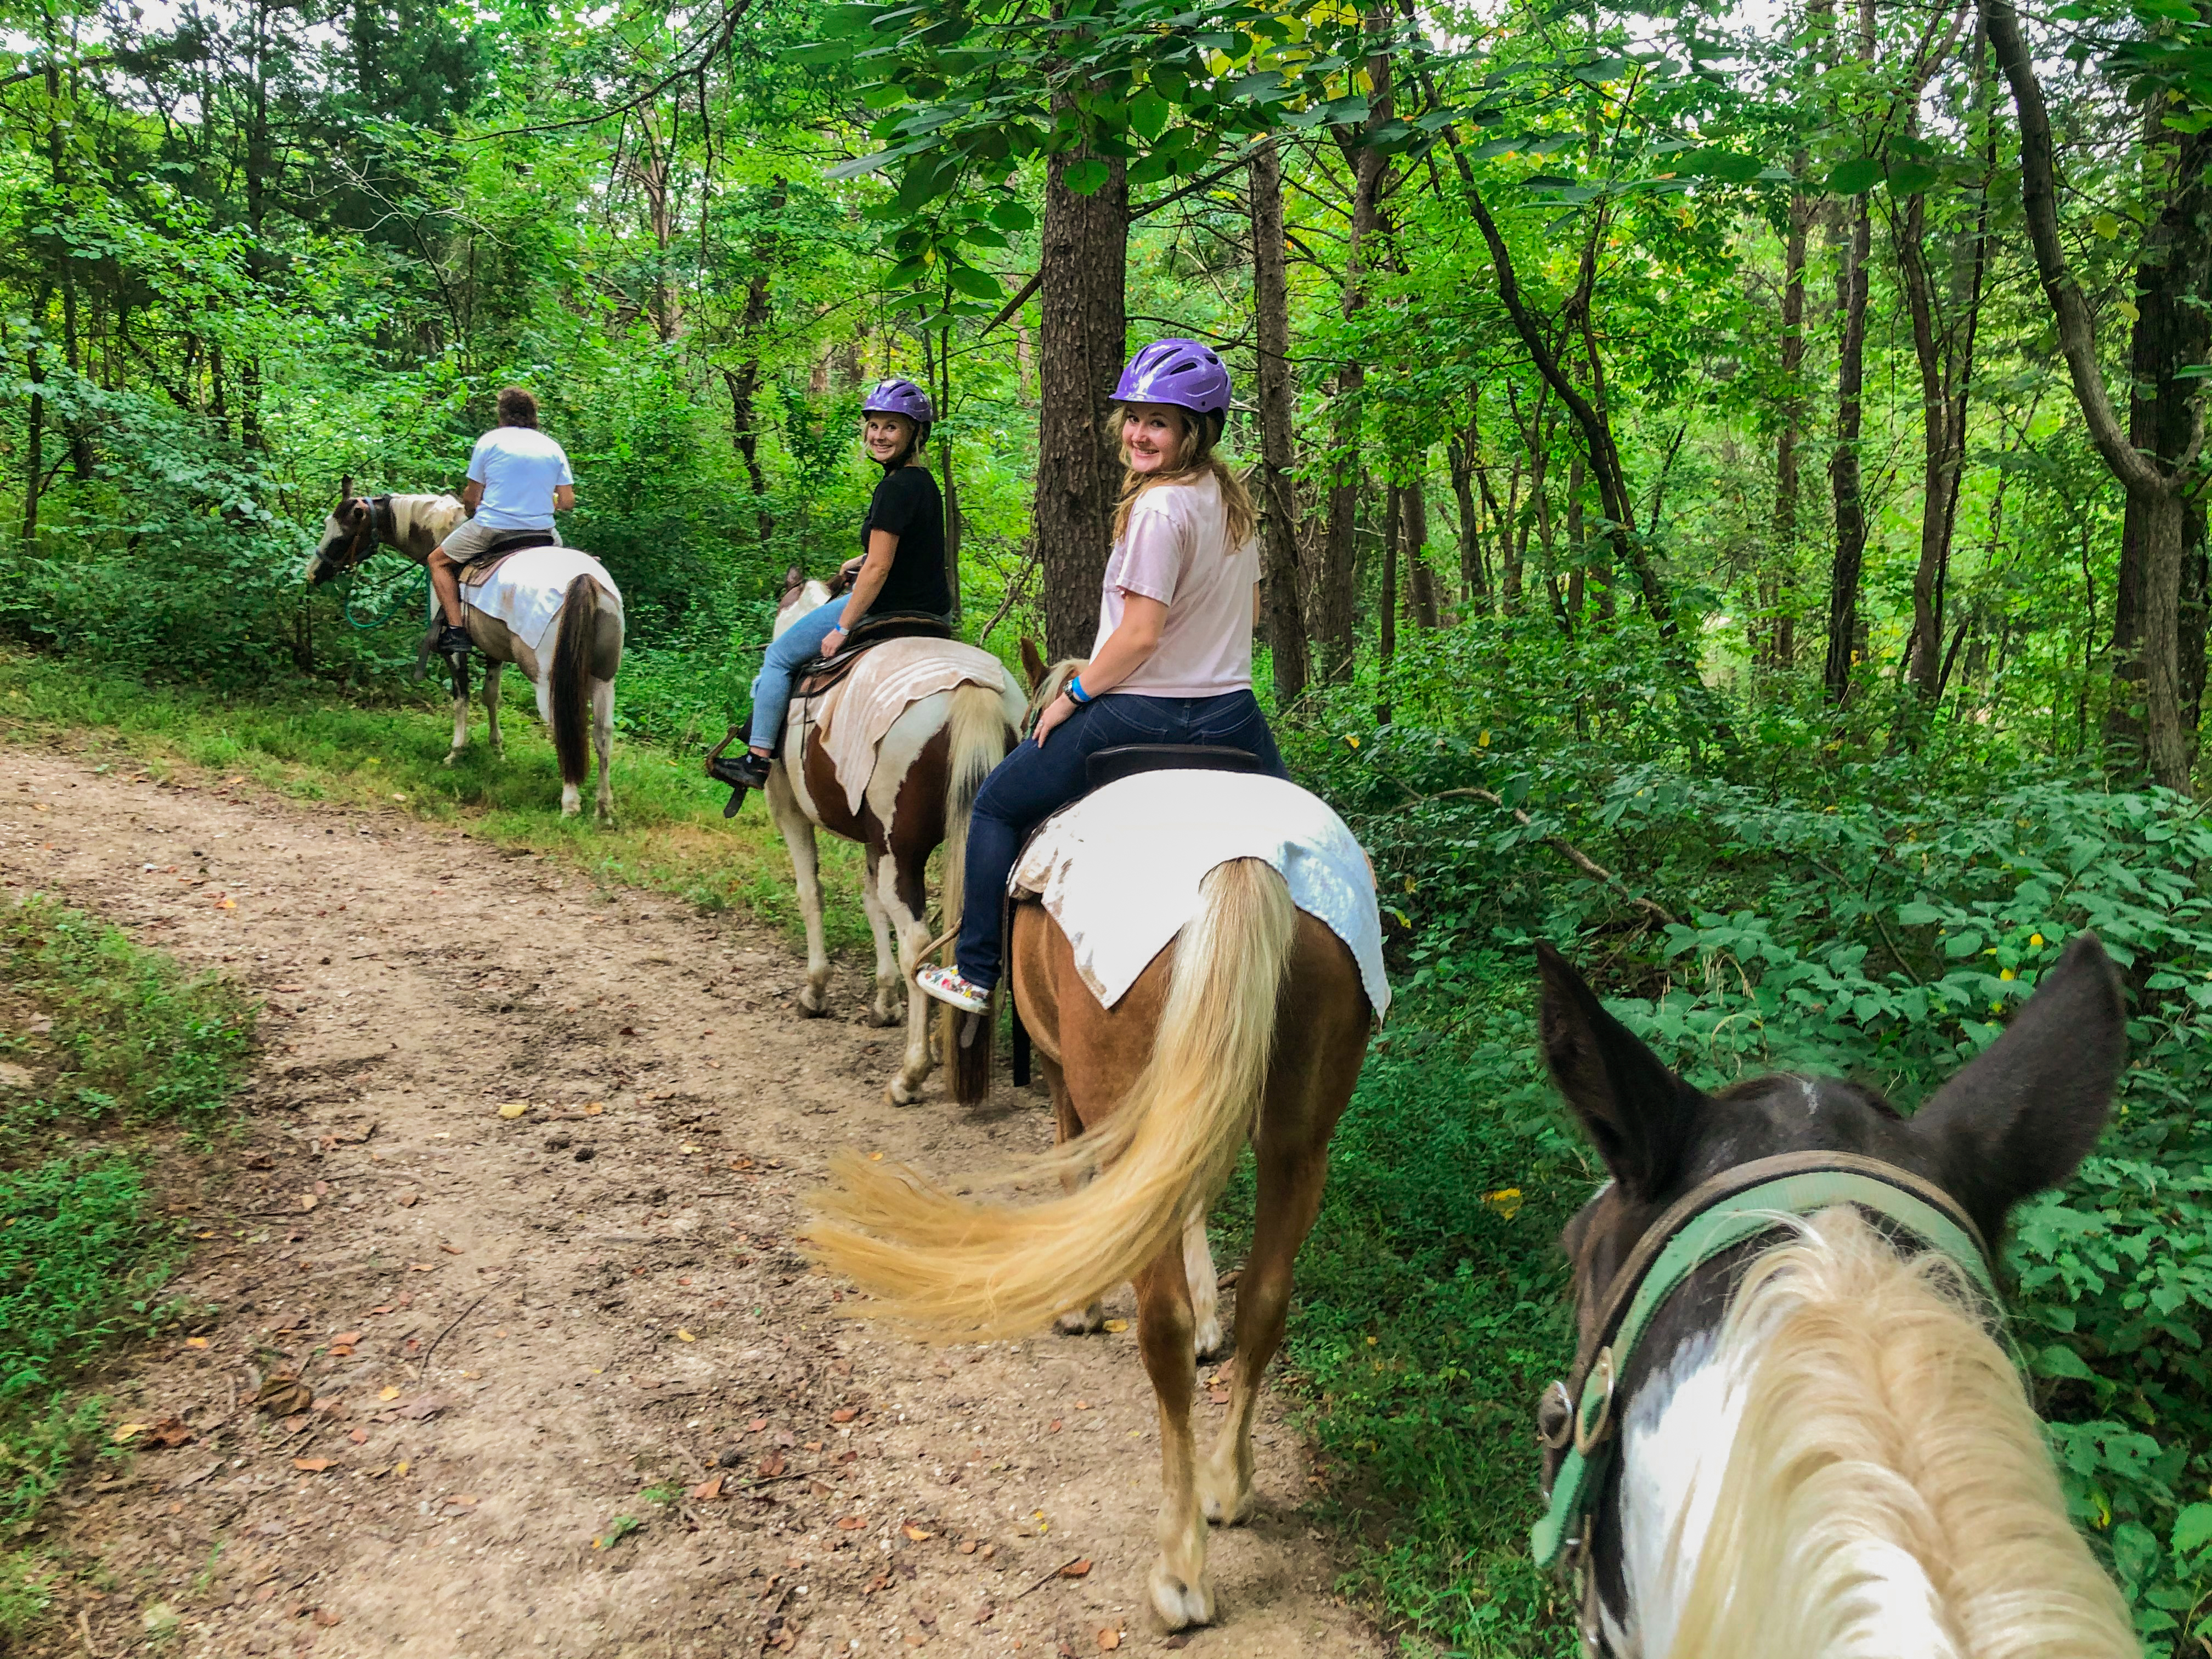 a group of people riding horses on a dirt path in the woods